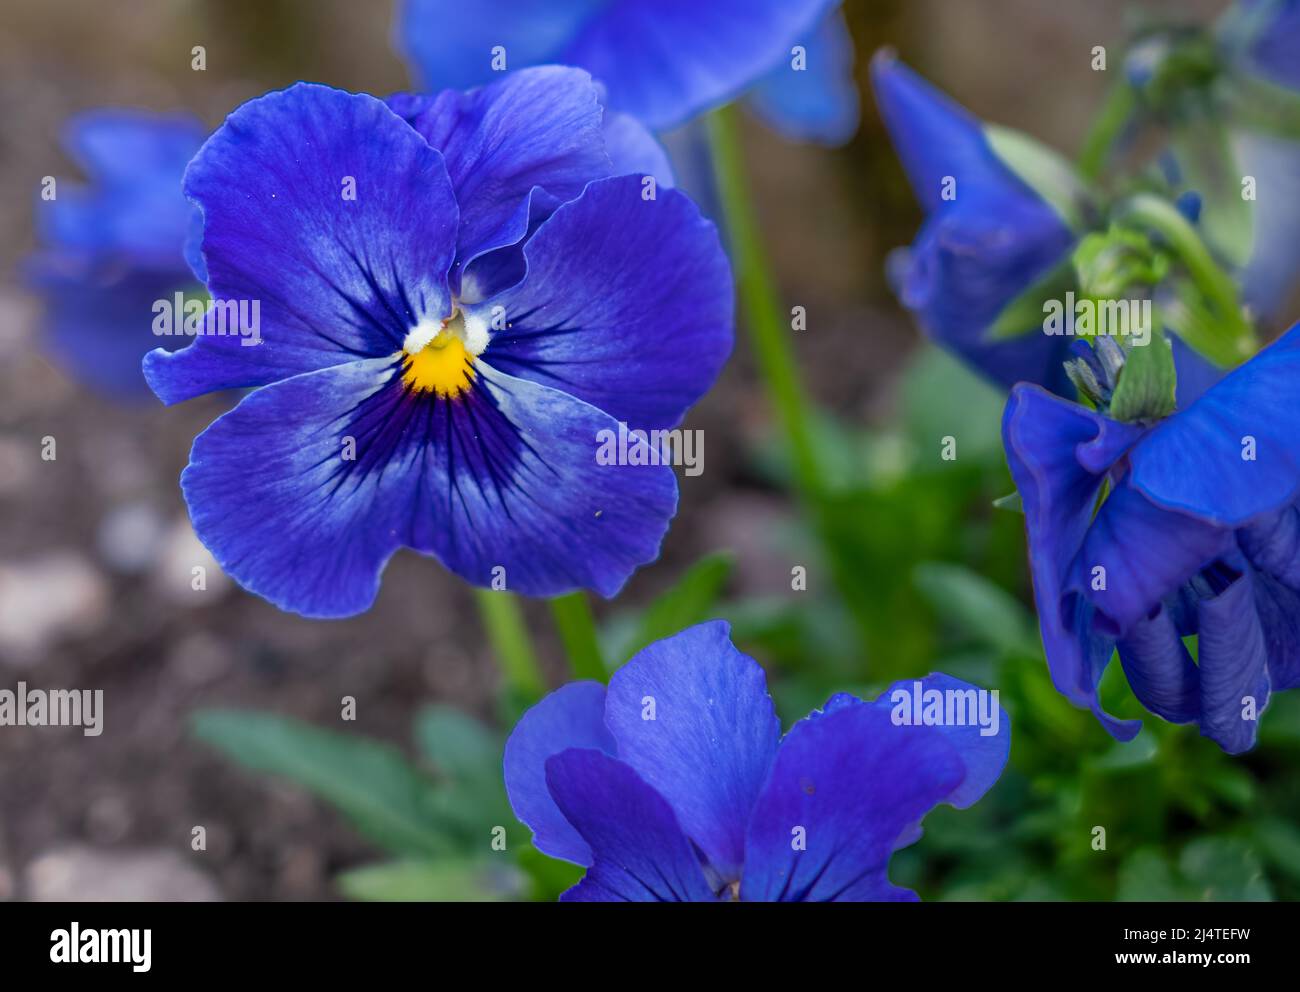 close up of a beautiful spring flowering blue Pansies (Viola tricolor var. hortensis) Stock Photo